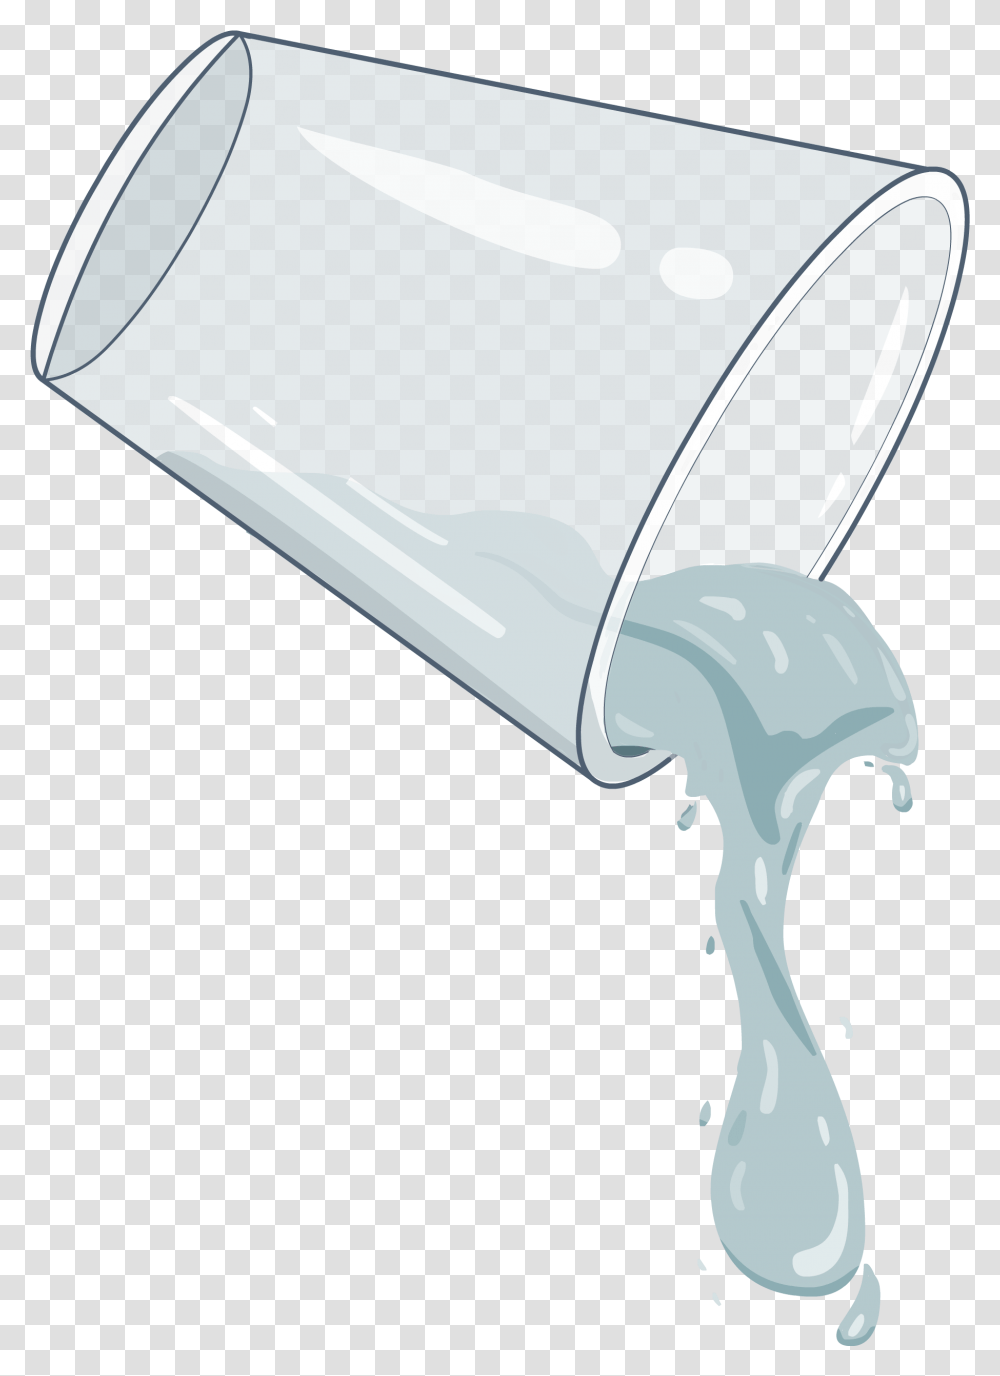 Glass Pouring Water Pouring Water, Milk, Beverage, Drink, Bottle Transparent Png